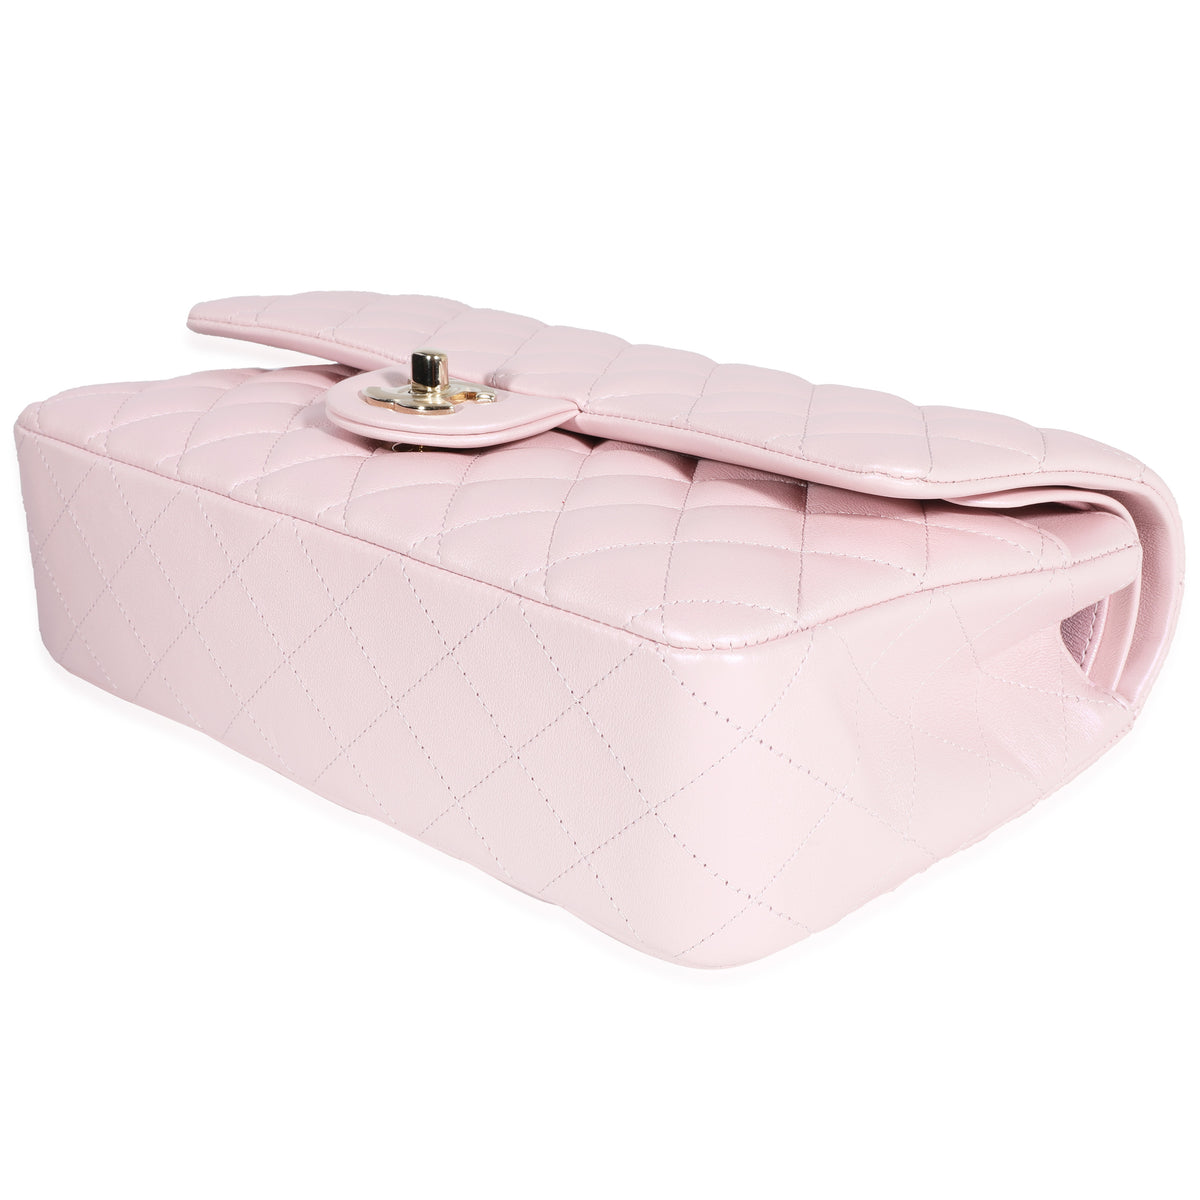 Chanel Iridescent Pink Quilted Lambskin Medium Classic Double Flap Bag, myGemma